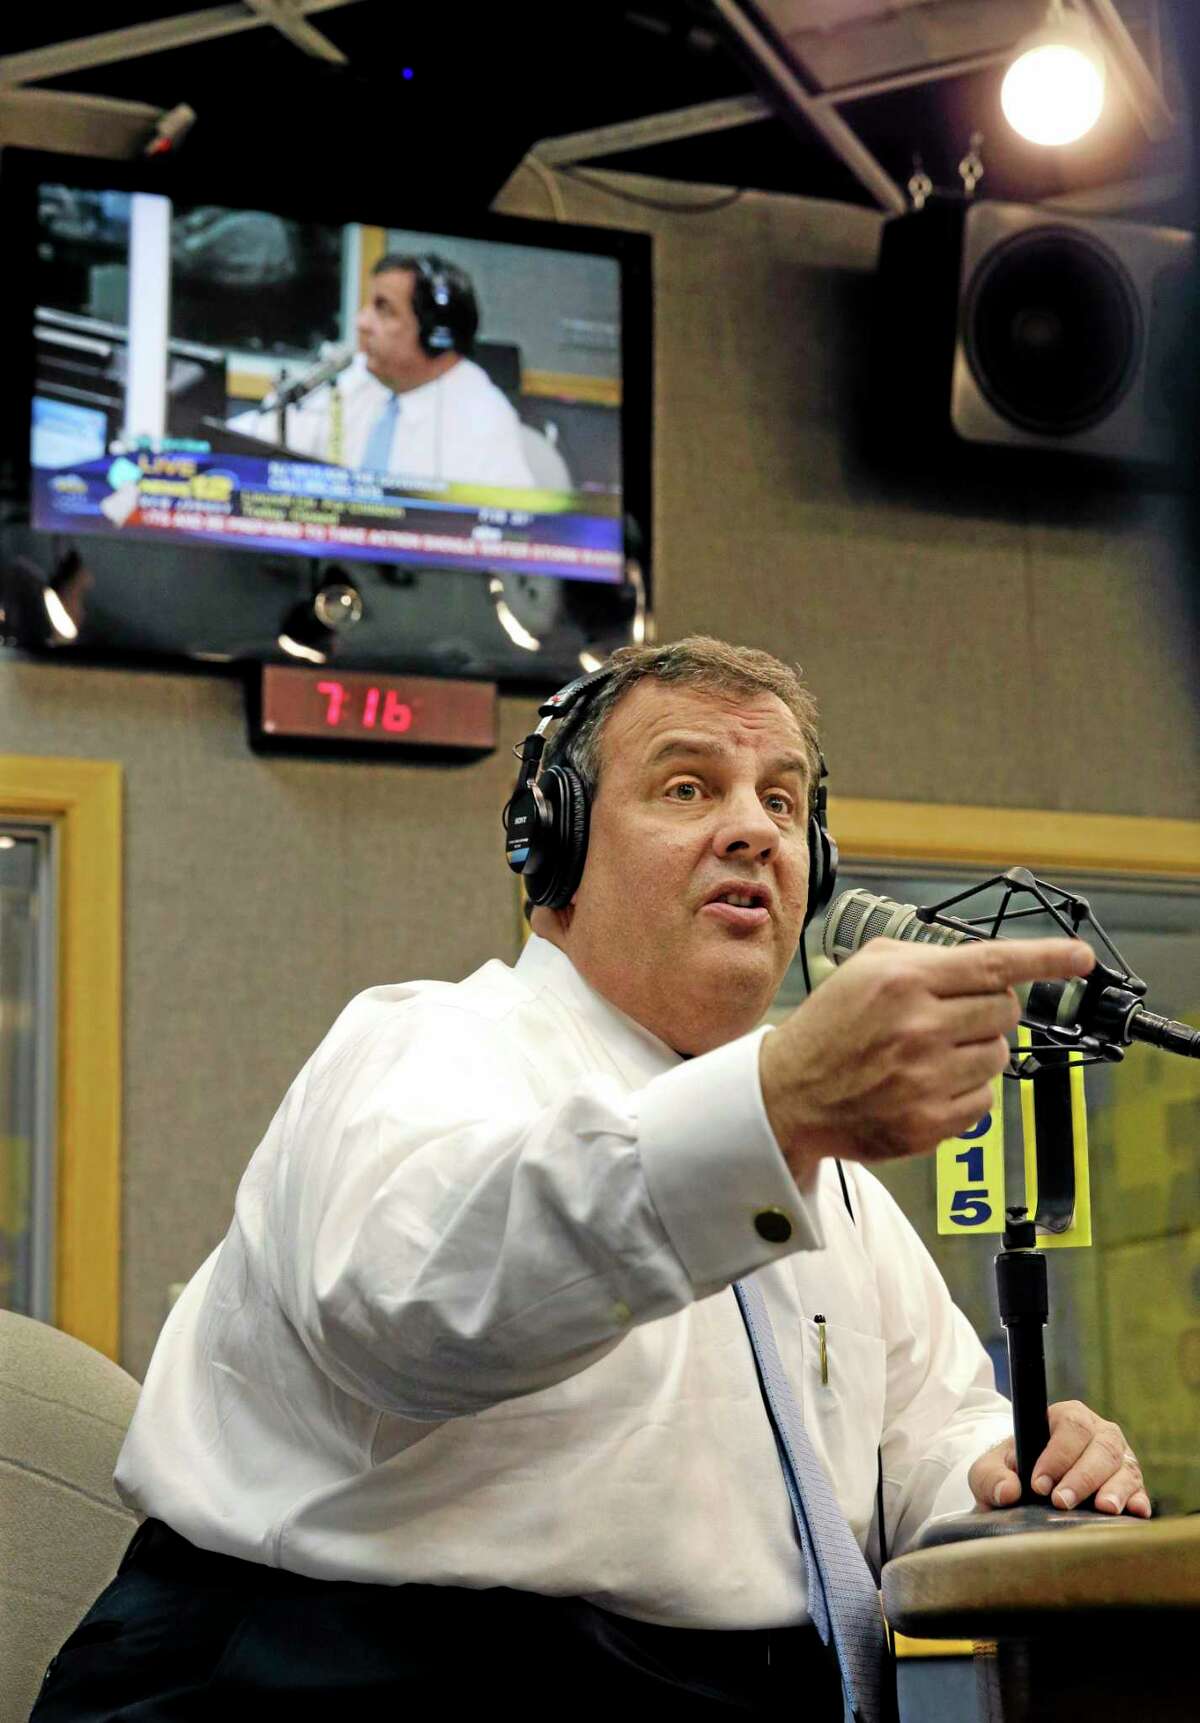 New Jersey Gov. Chris Christie sits in a studio during his radio program, "Ask the Governor" broadcast on NJ 101.5, Monday, Feb. 3, 2014, in Ewing, N.J. During the program, Christie took questions from callers for the first time in more than three weeks as his campaign looked for a way to pay for lawyers as a political payback scandal continues. (AP Photo/Mel Evans, Pool)